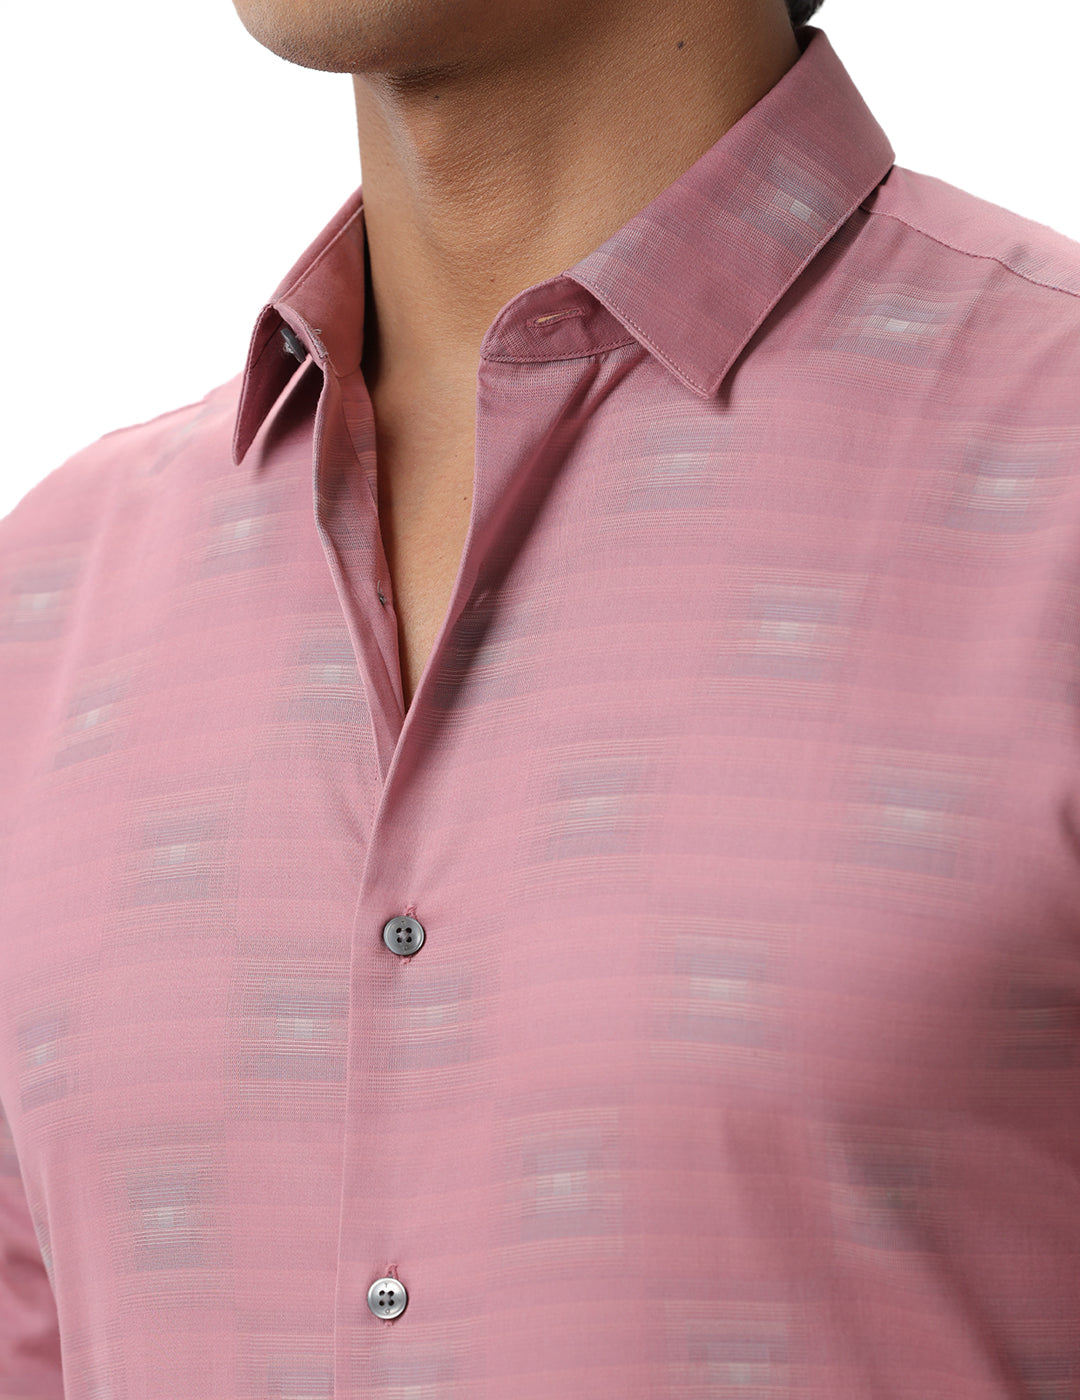 Light Formal Or Casual Shirt